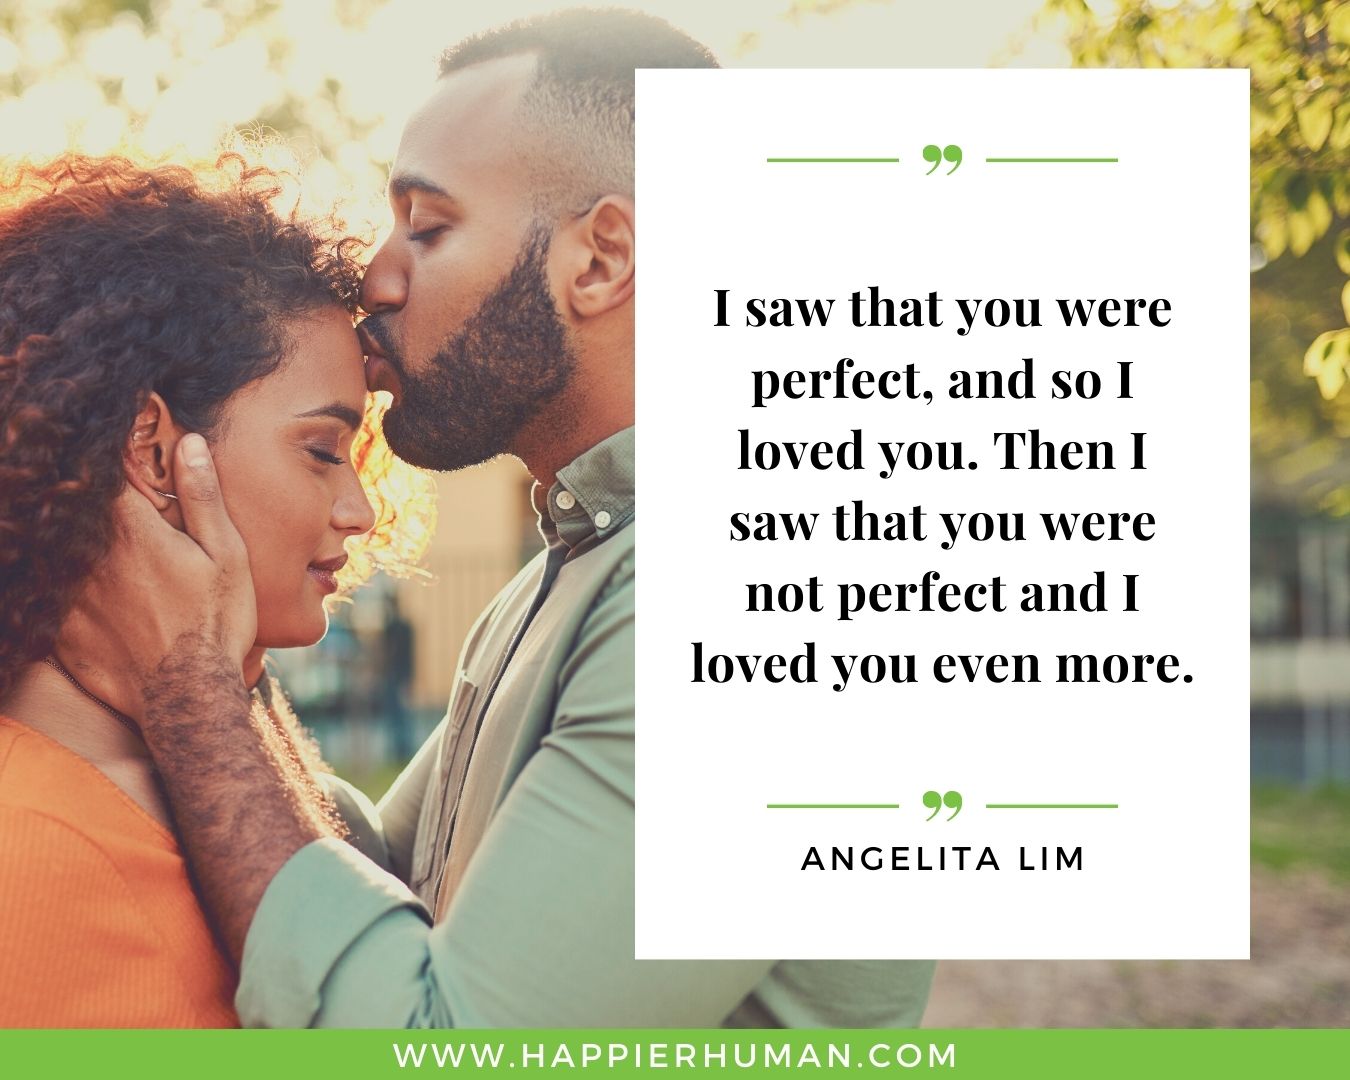 Unconditional Love Quotes for Her - “I saw that you were perfect, and so I loved you. Then I saw that you were not perfect and I loved you even more.” – Angelita Lim